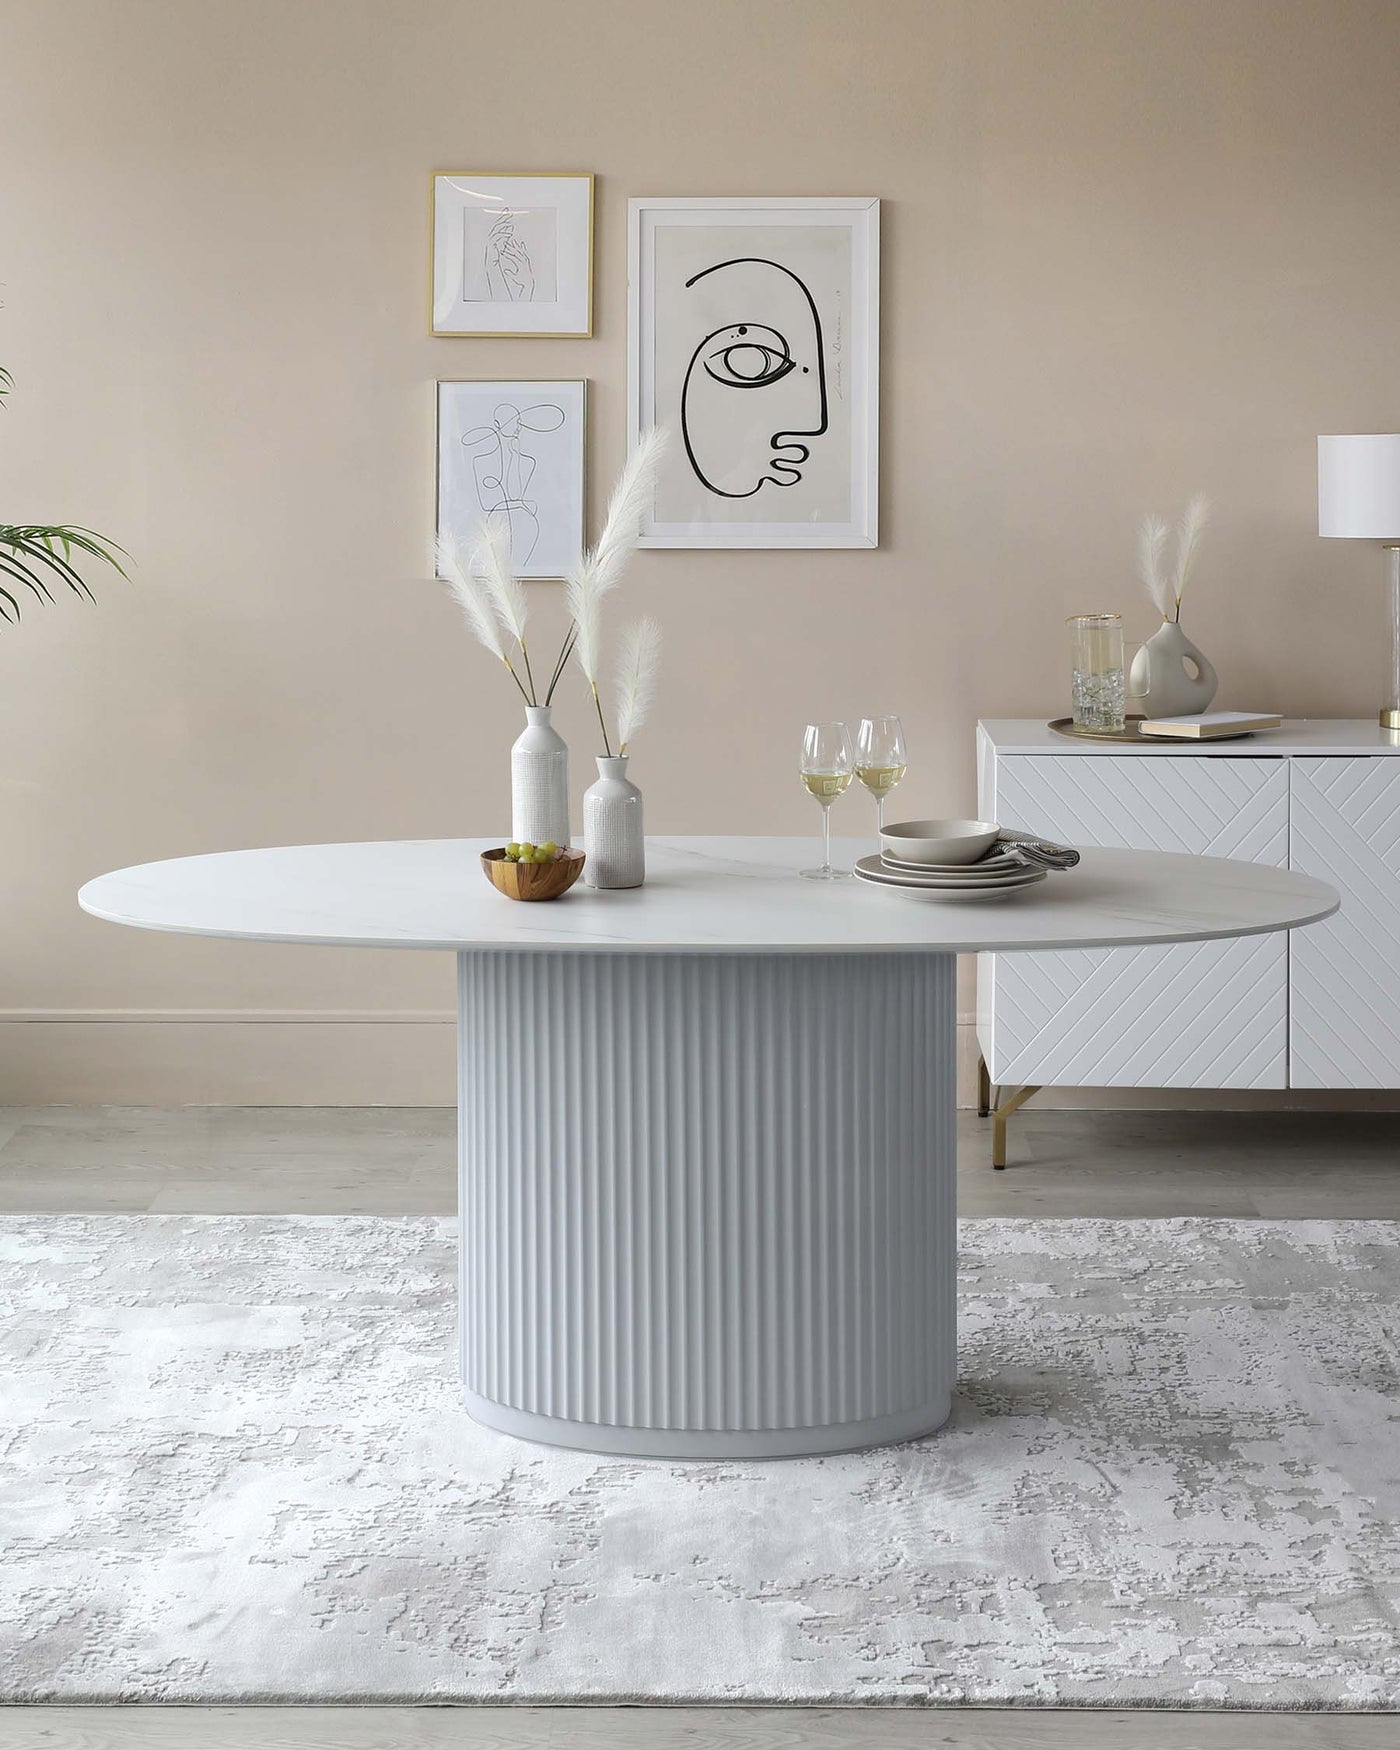 Modern minimalist dining room featuring an oval white table with a fluted pedestal base, accompanied by a sleek white sideboard with subtle geometric patterns. The room is accessorized with decorative vases and a tasteful arrangement of wall art.